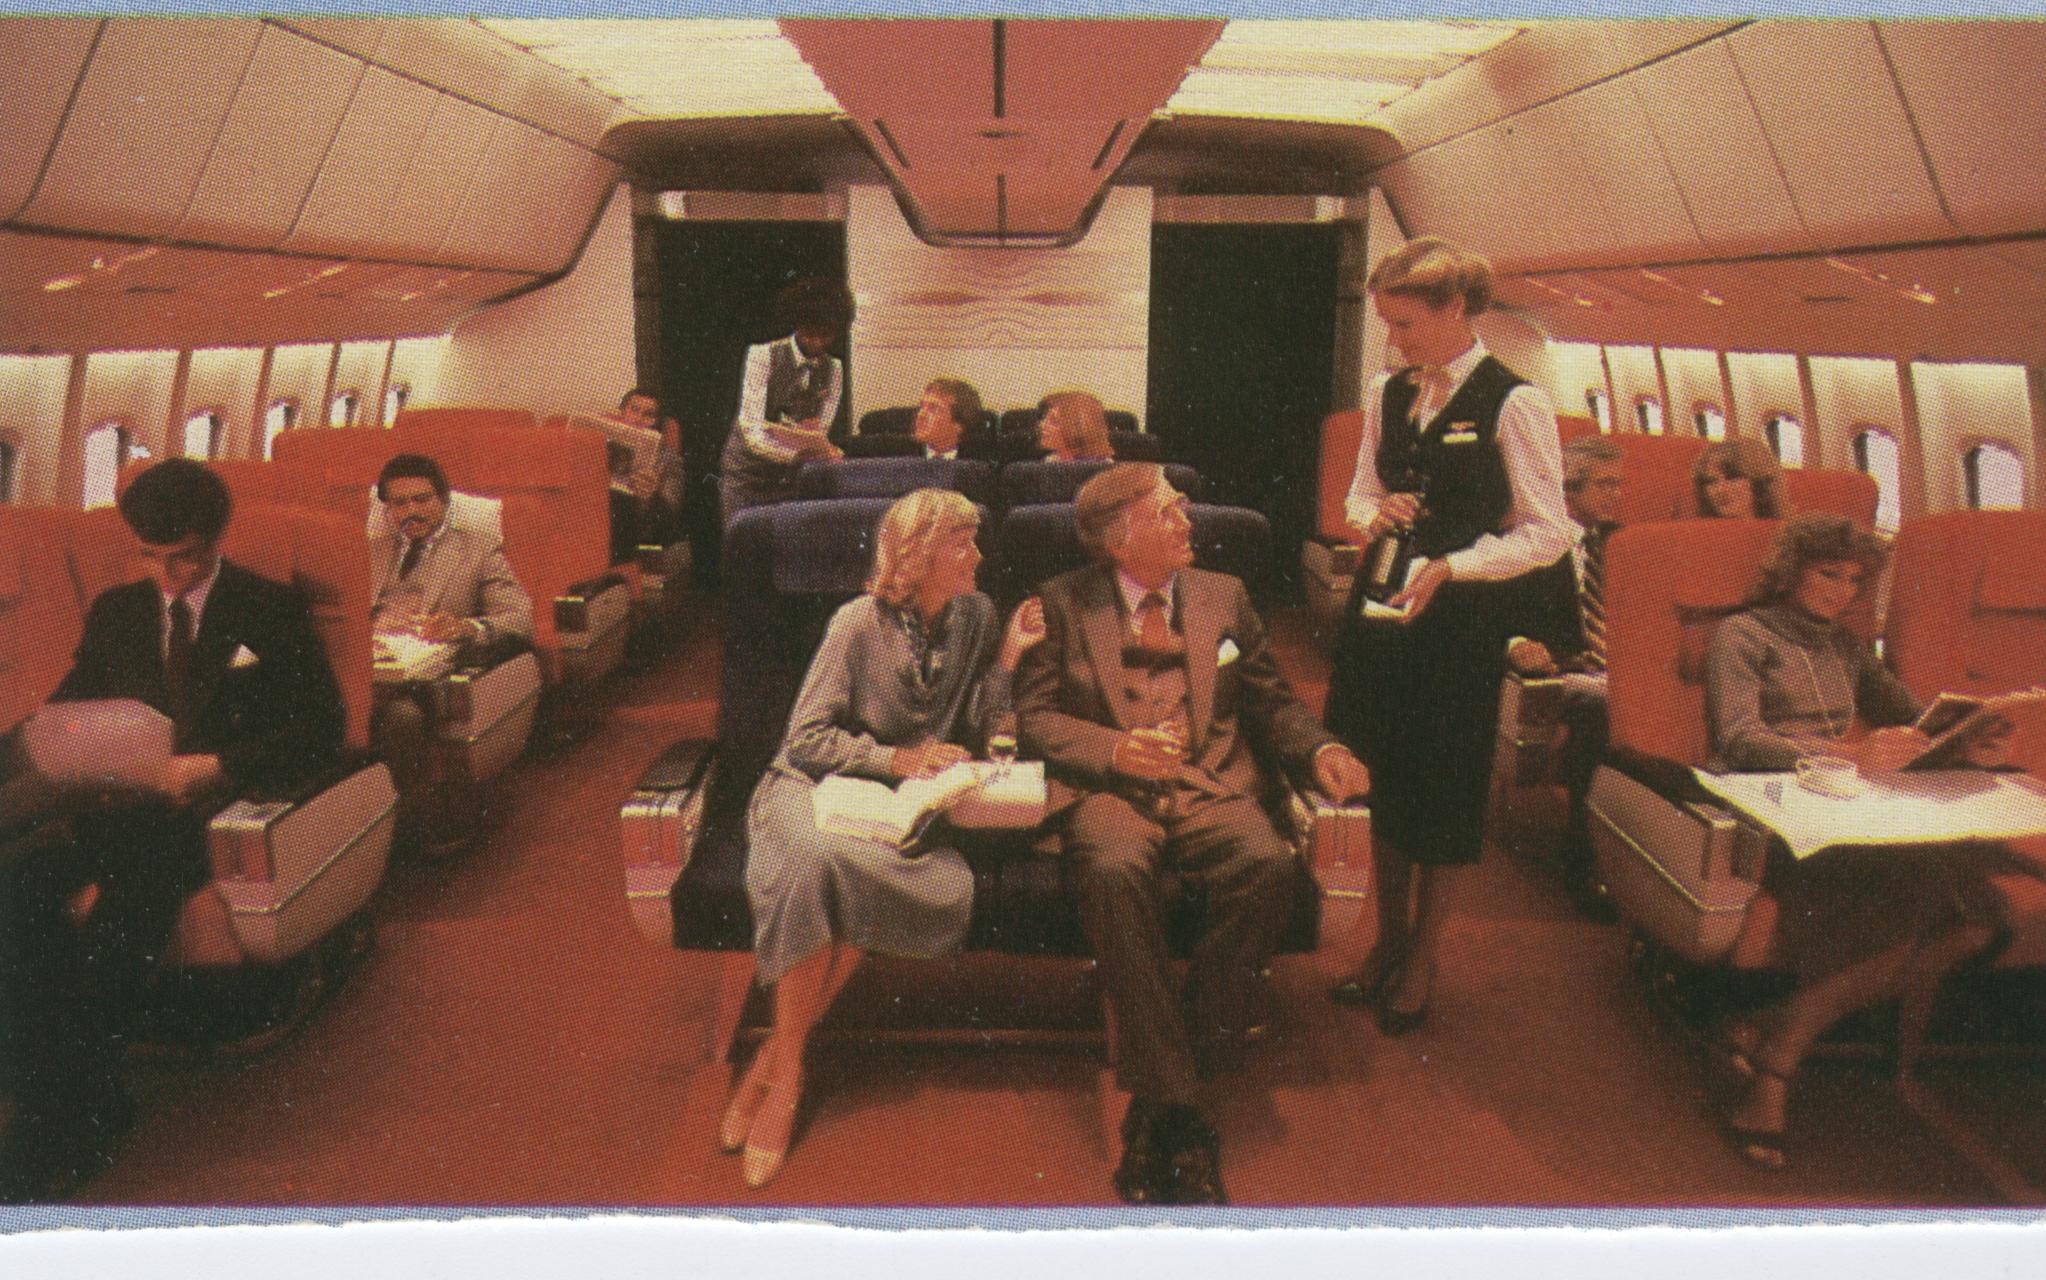 1980 The First Class cabin of Pan Am's Lockheed L1011-500.  This cabin would be modified with Sleeperette  seats in First Class within a year of delivery to Pan Am.